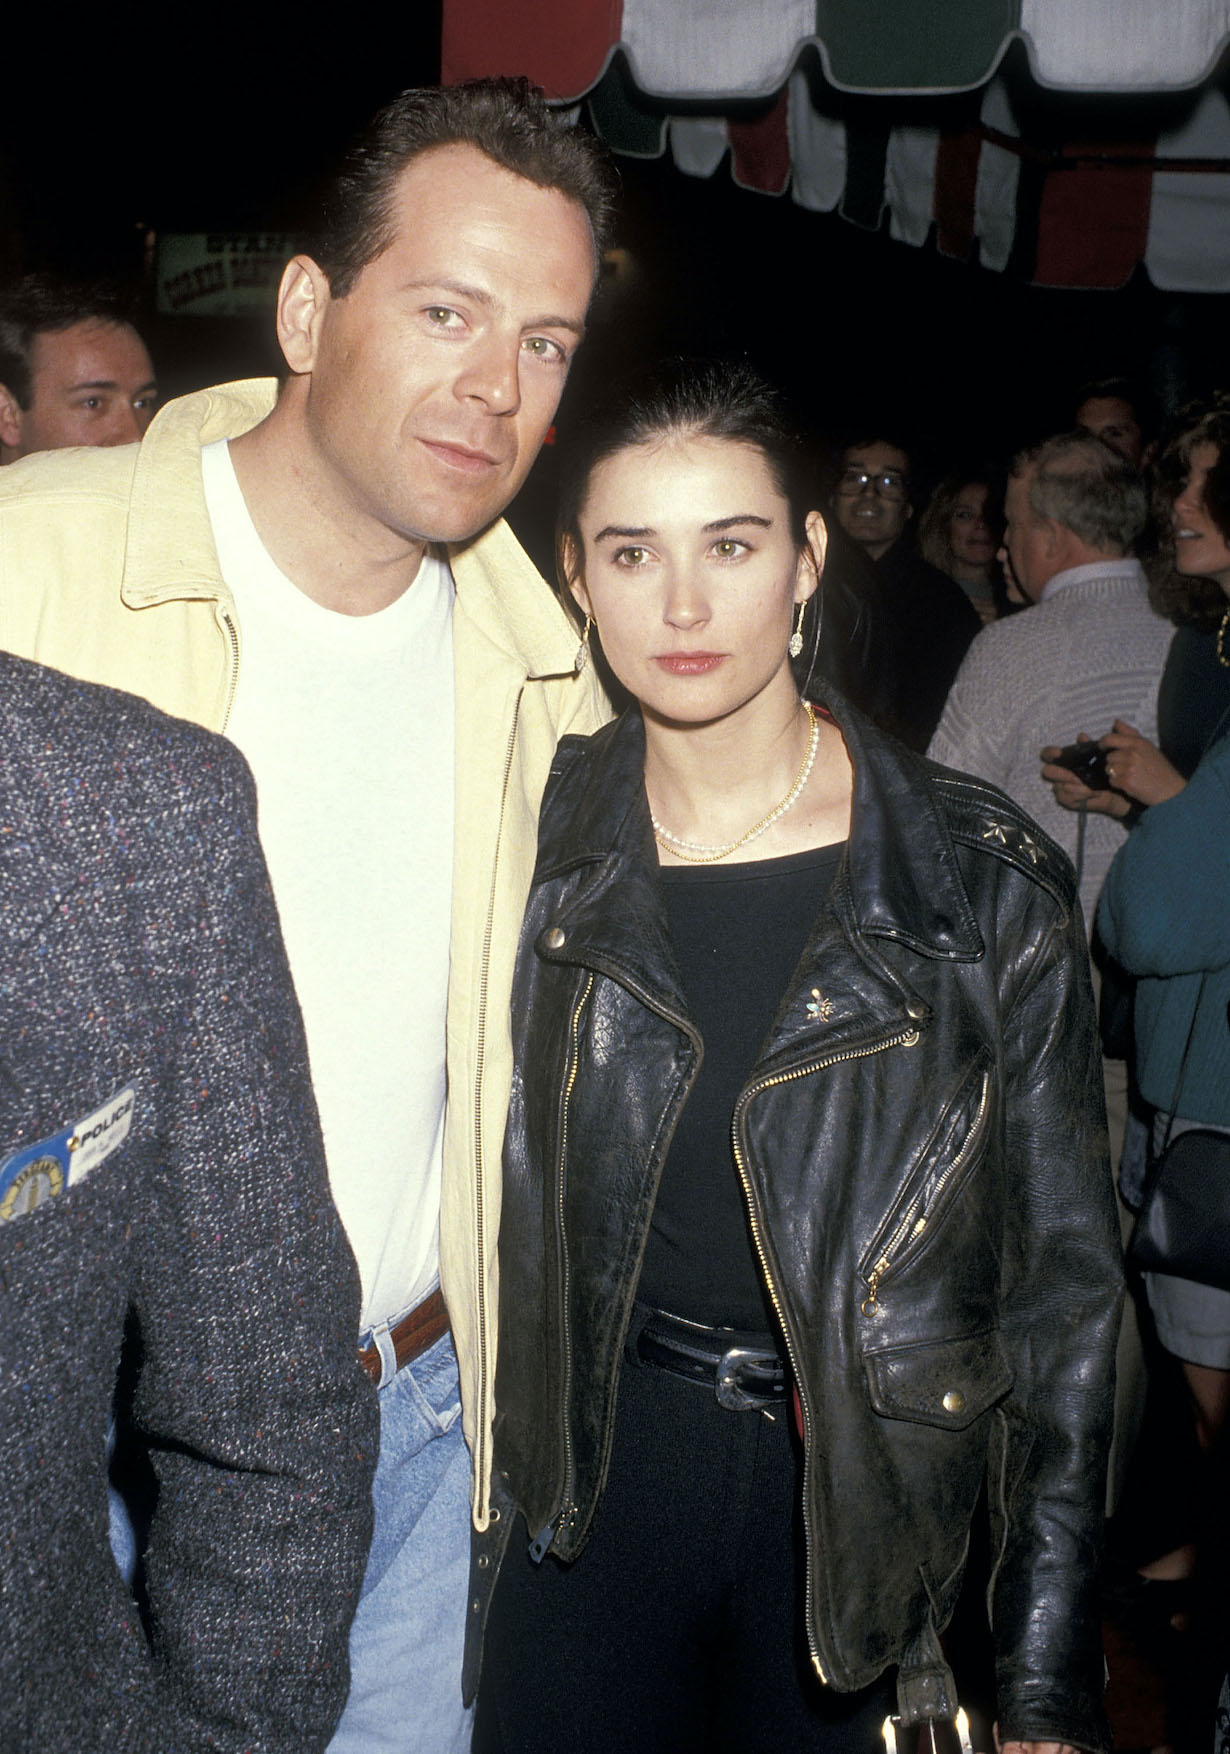 Bruce Willis and Demi Moore attend the "Chances Are" Westwood Premiere on March 8, 1989